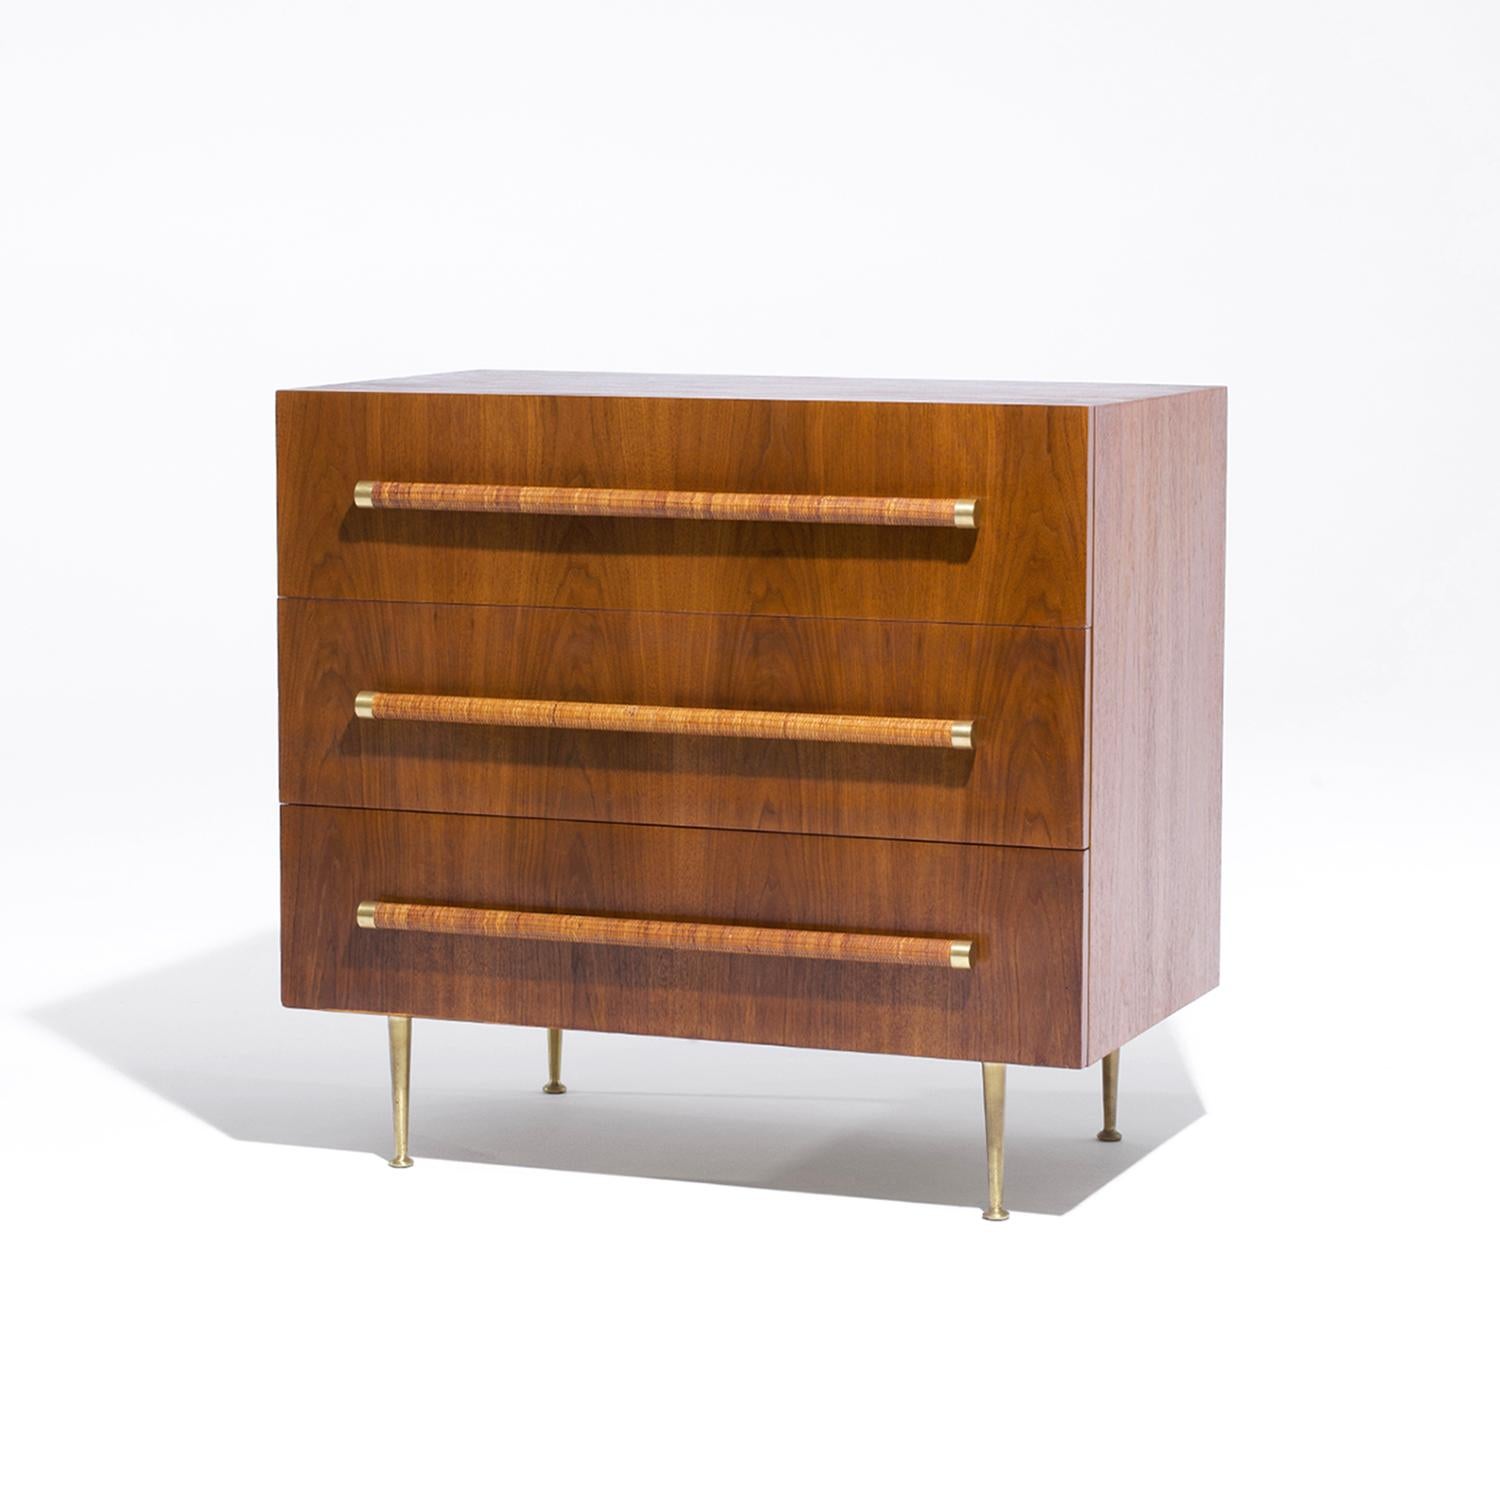 A single, vintage Mid-Century modern American dresser made of hand crafted polished Walnut designed by T.H. Robsjohn Gibbings and produced by Widdicomb, in good condition. The detailed chest is composed of three drawers enhanced by a long